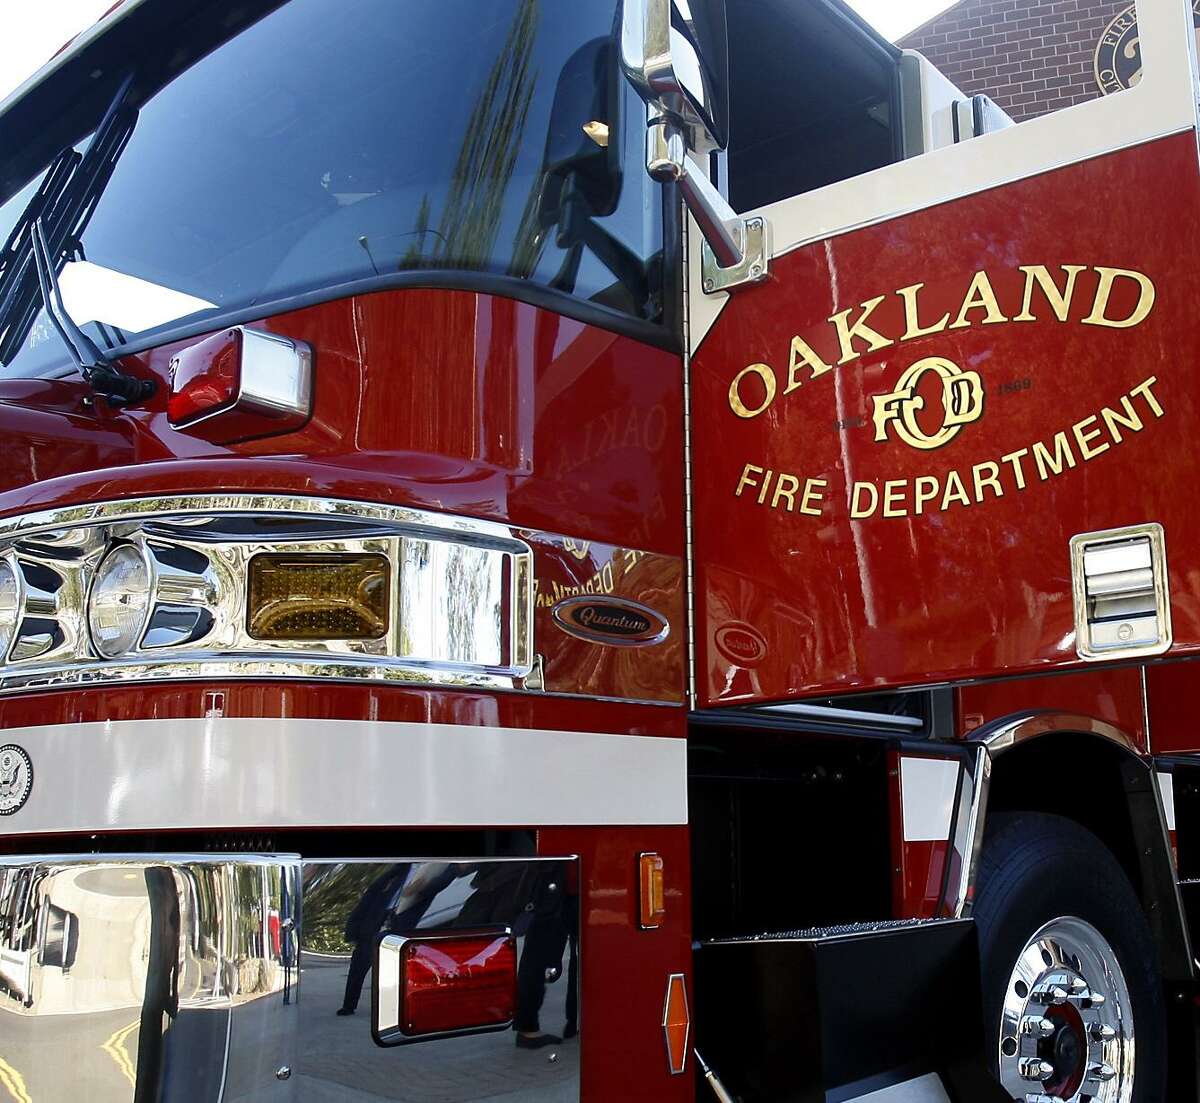 An Oakland Fire Department engine sits outside fire station in Oakland.